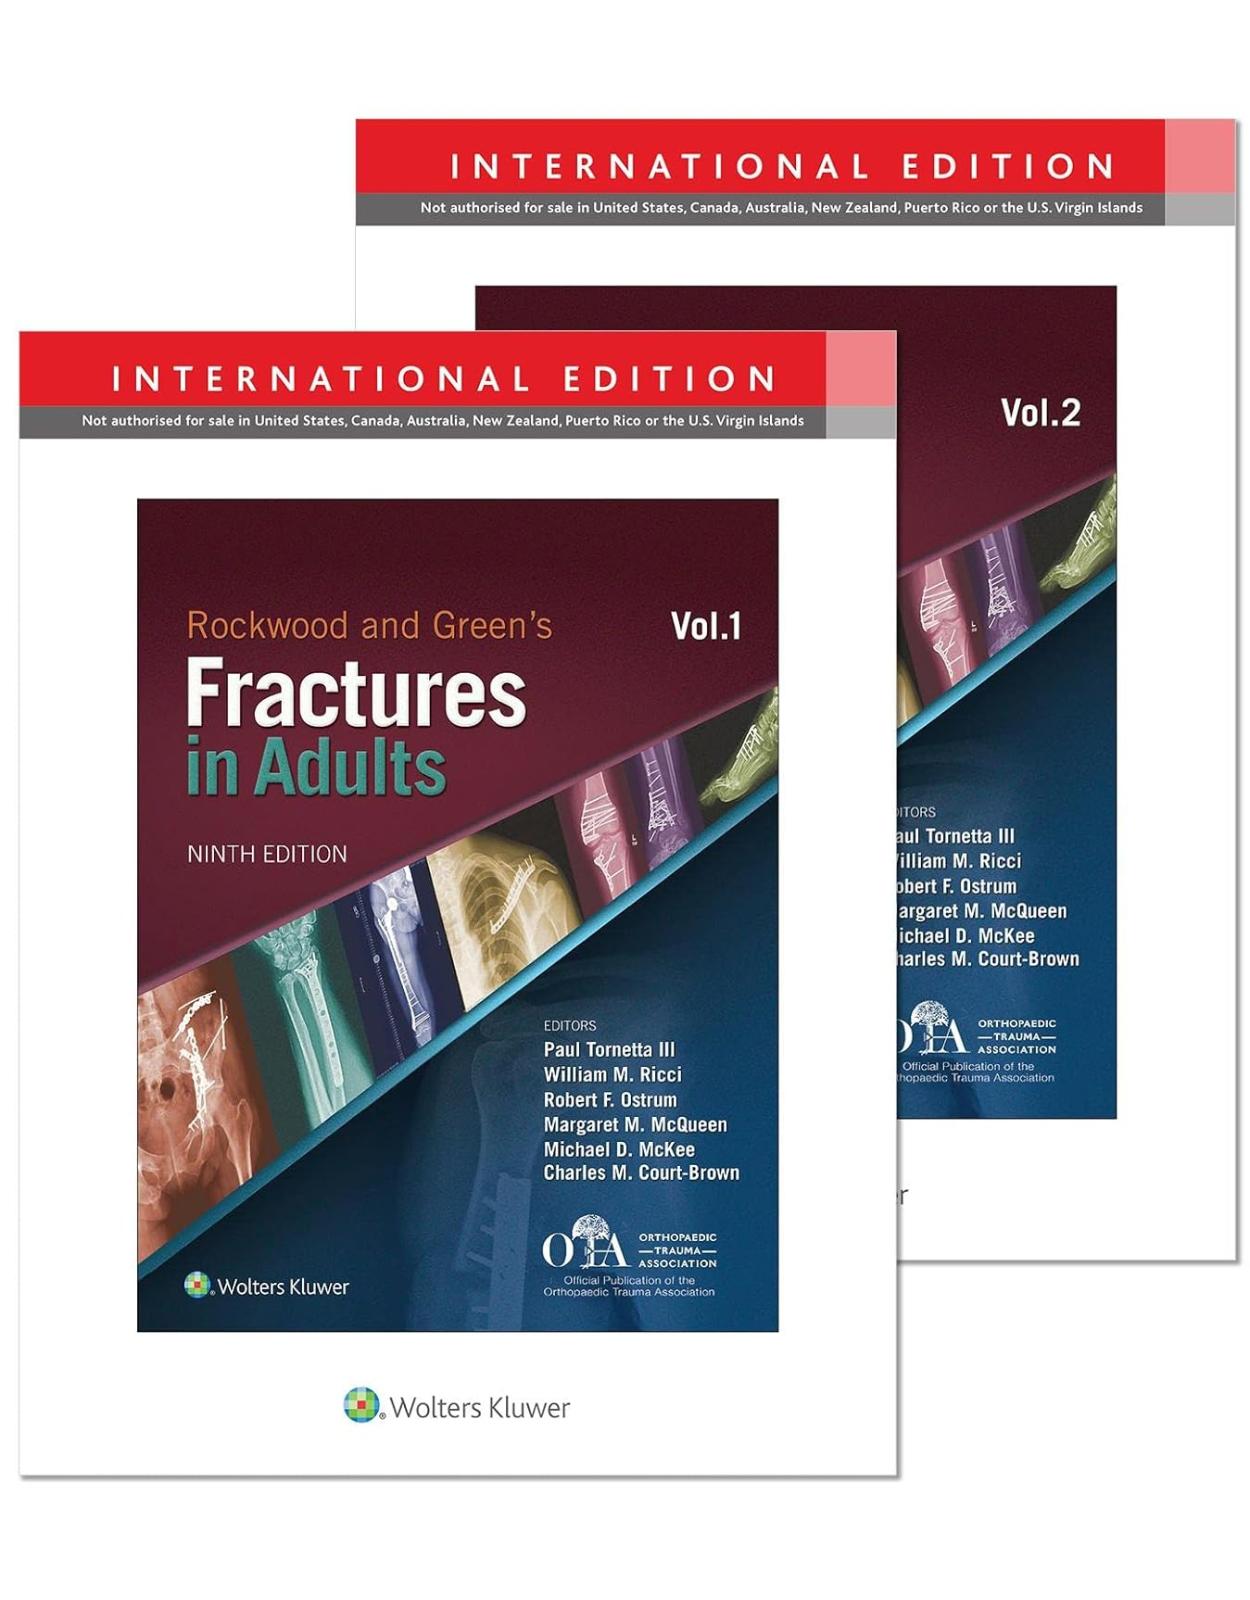 Rockwood and Green’s Fractures in Adults, Ninth Edition